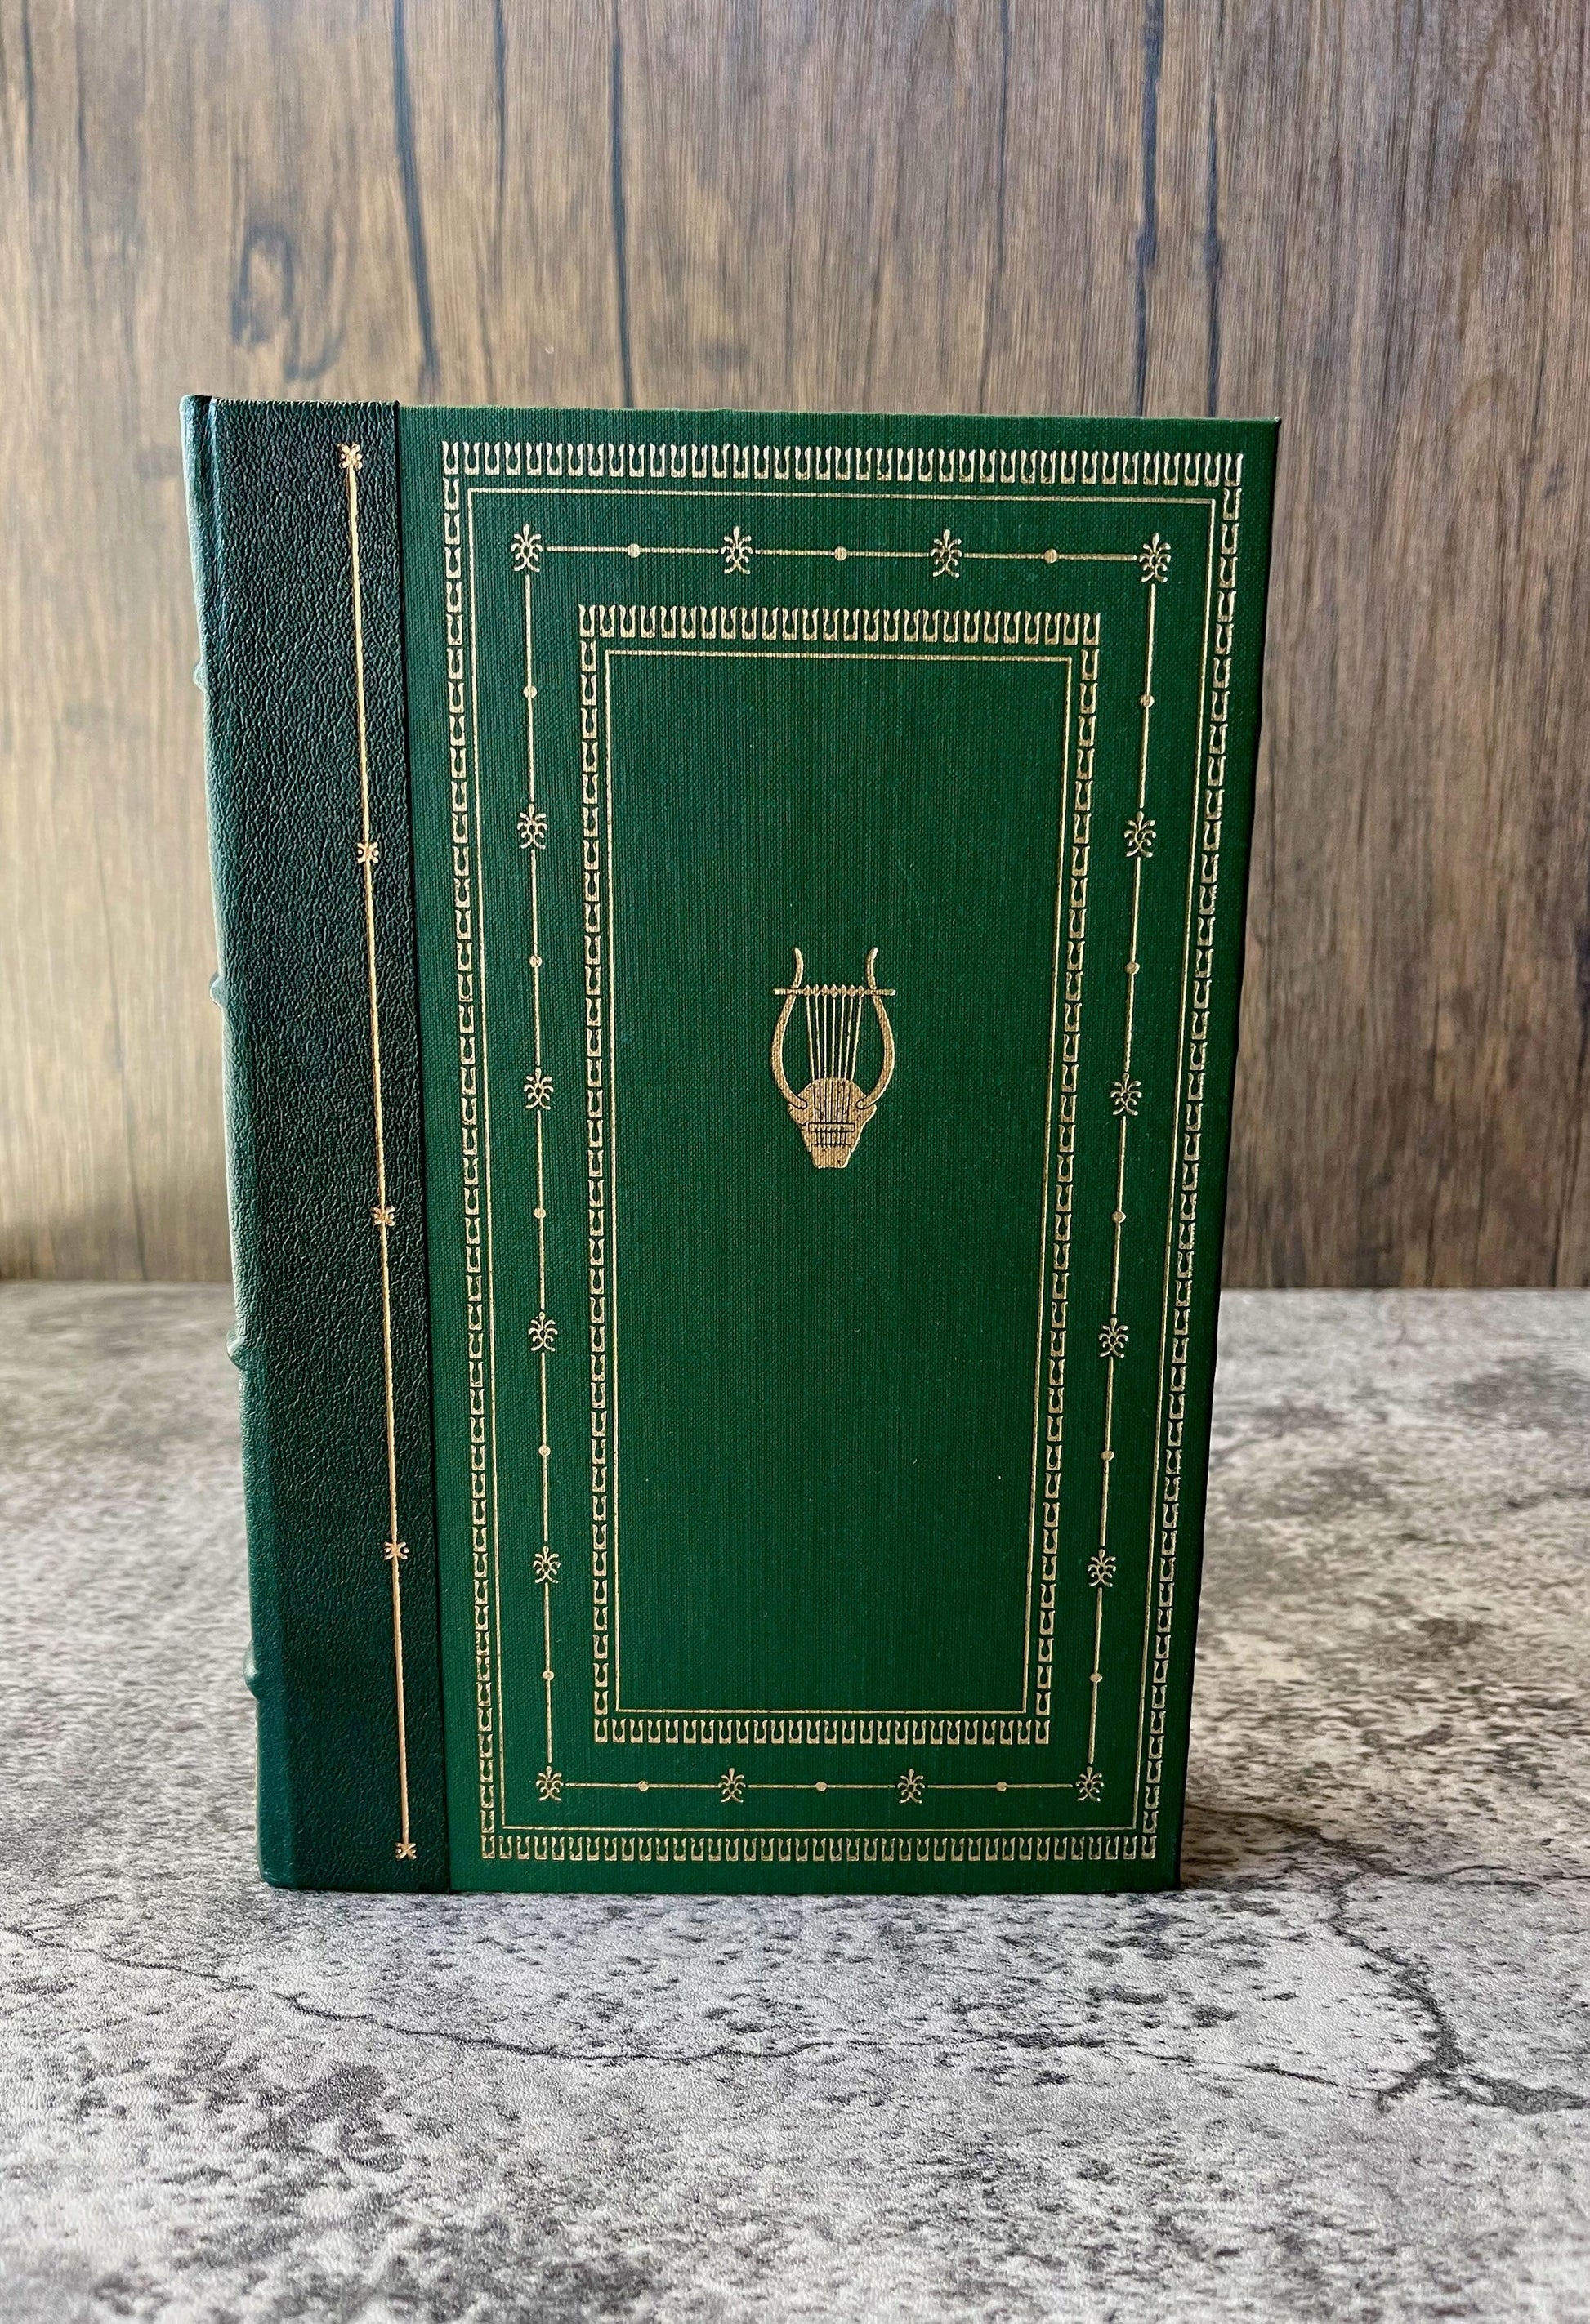 Selected Dialogues / The Franklin Library / Quarter Bound Leather / 1981 - Precious Cache